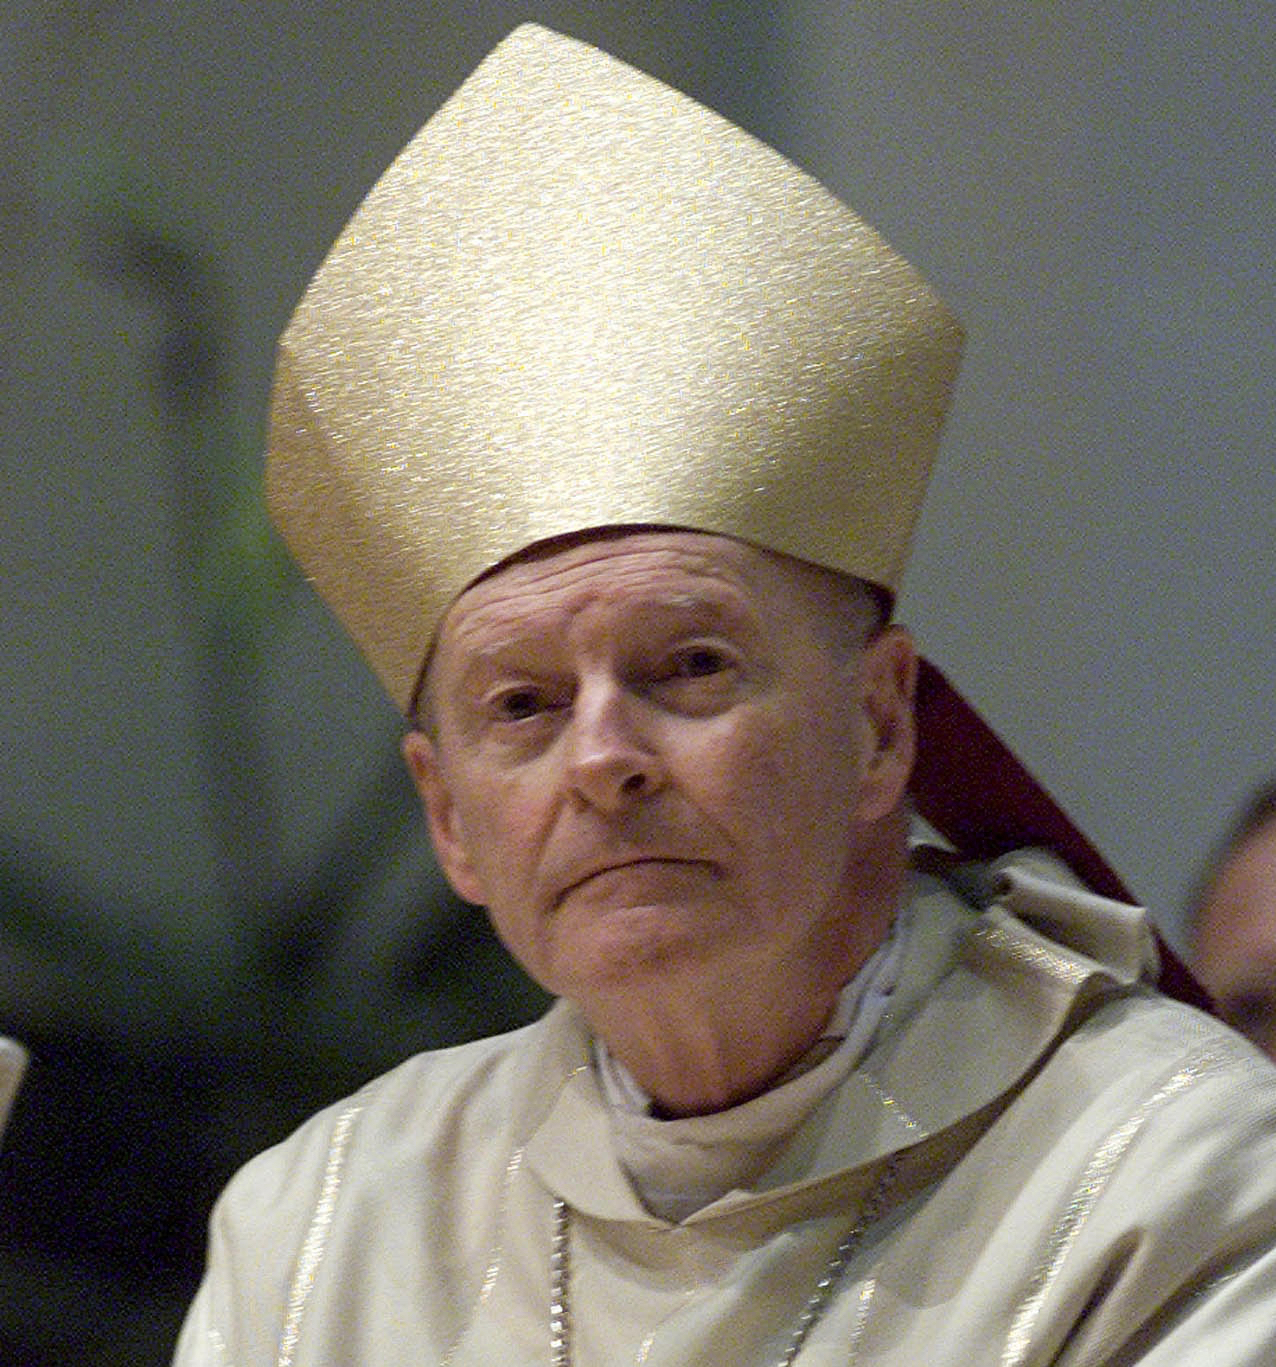 Laicised cardinal, in interview, continues to deny abuse allegations